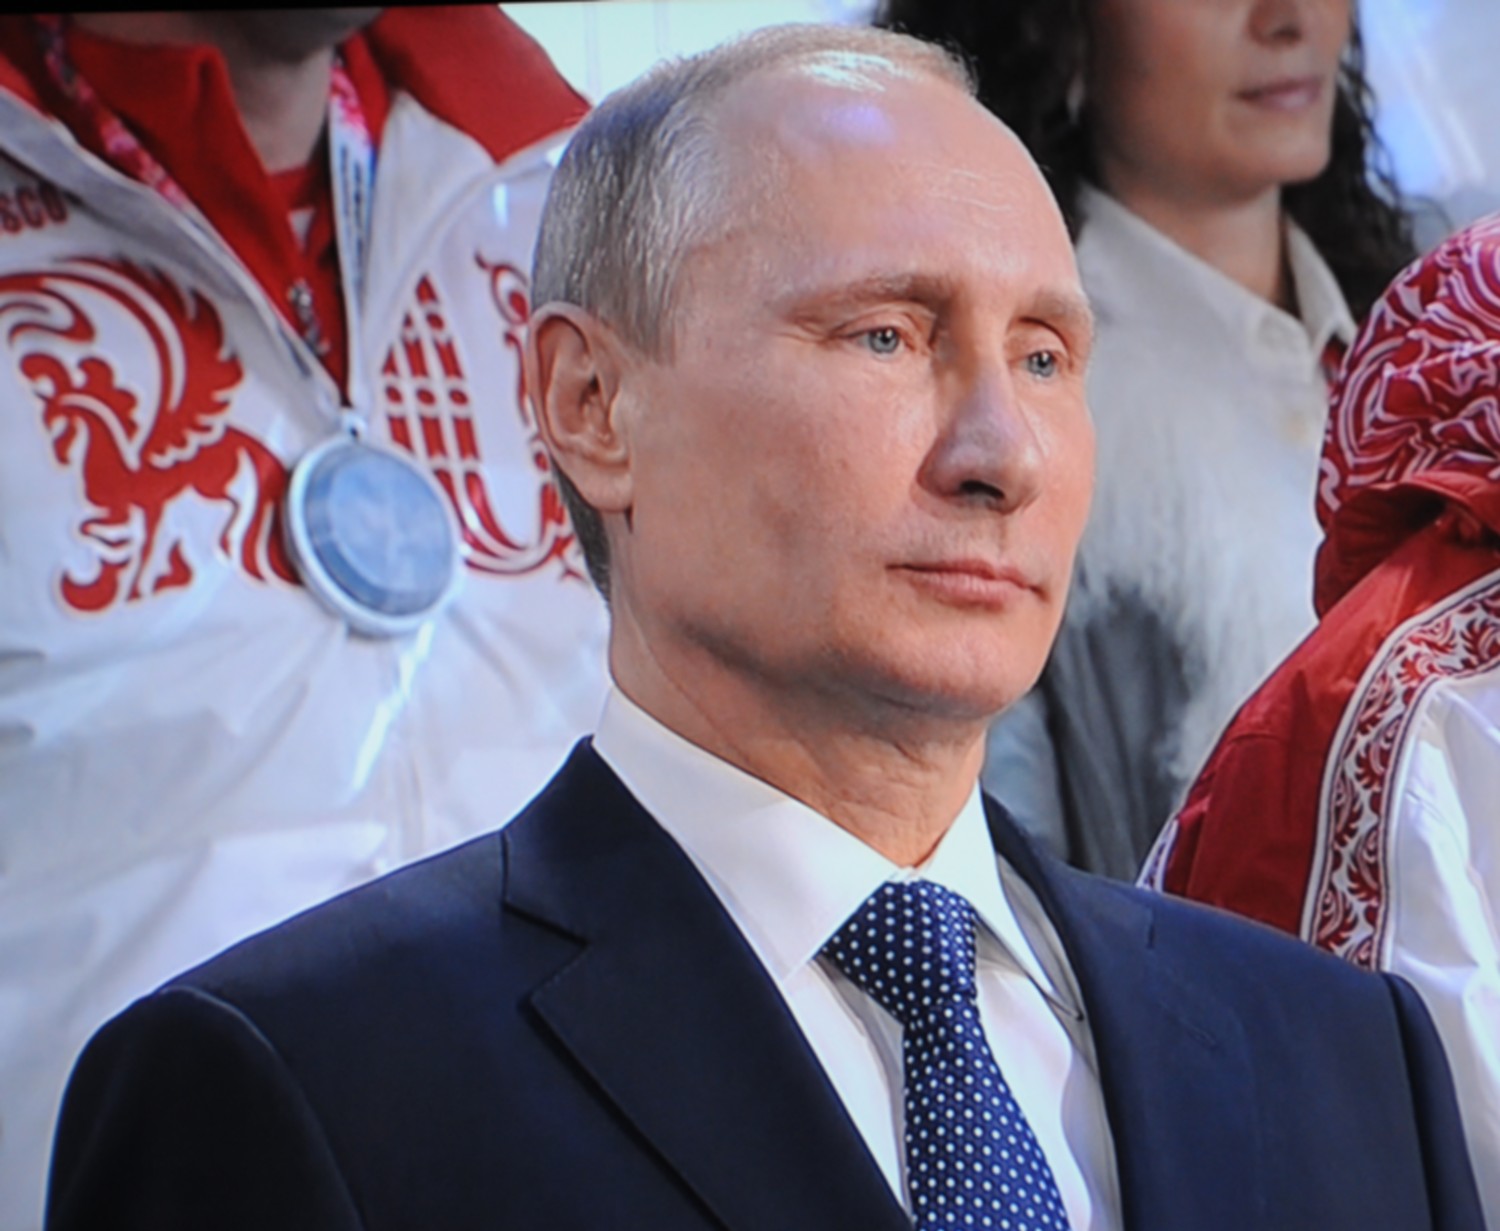 Russian President Vladimir Putin, at the 2014 Olympics in Sochi. The US has evidence that Putin was directly involved in orchestrating cyber attacks and information dissemination intended to tilt the US election toward Donald Trump’s victory. Trump has dismissed the unified analysis of more than a dozen US intelligence agencies and has indicated he would be a close ally of Putin or as Hillary Clinton put it during the campaign, “Putin’s Puppet.”© 2016 Karen Rubin/news-photos-features.com